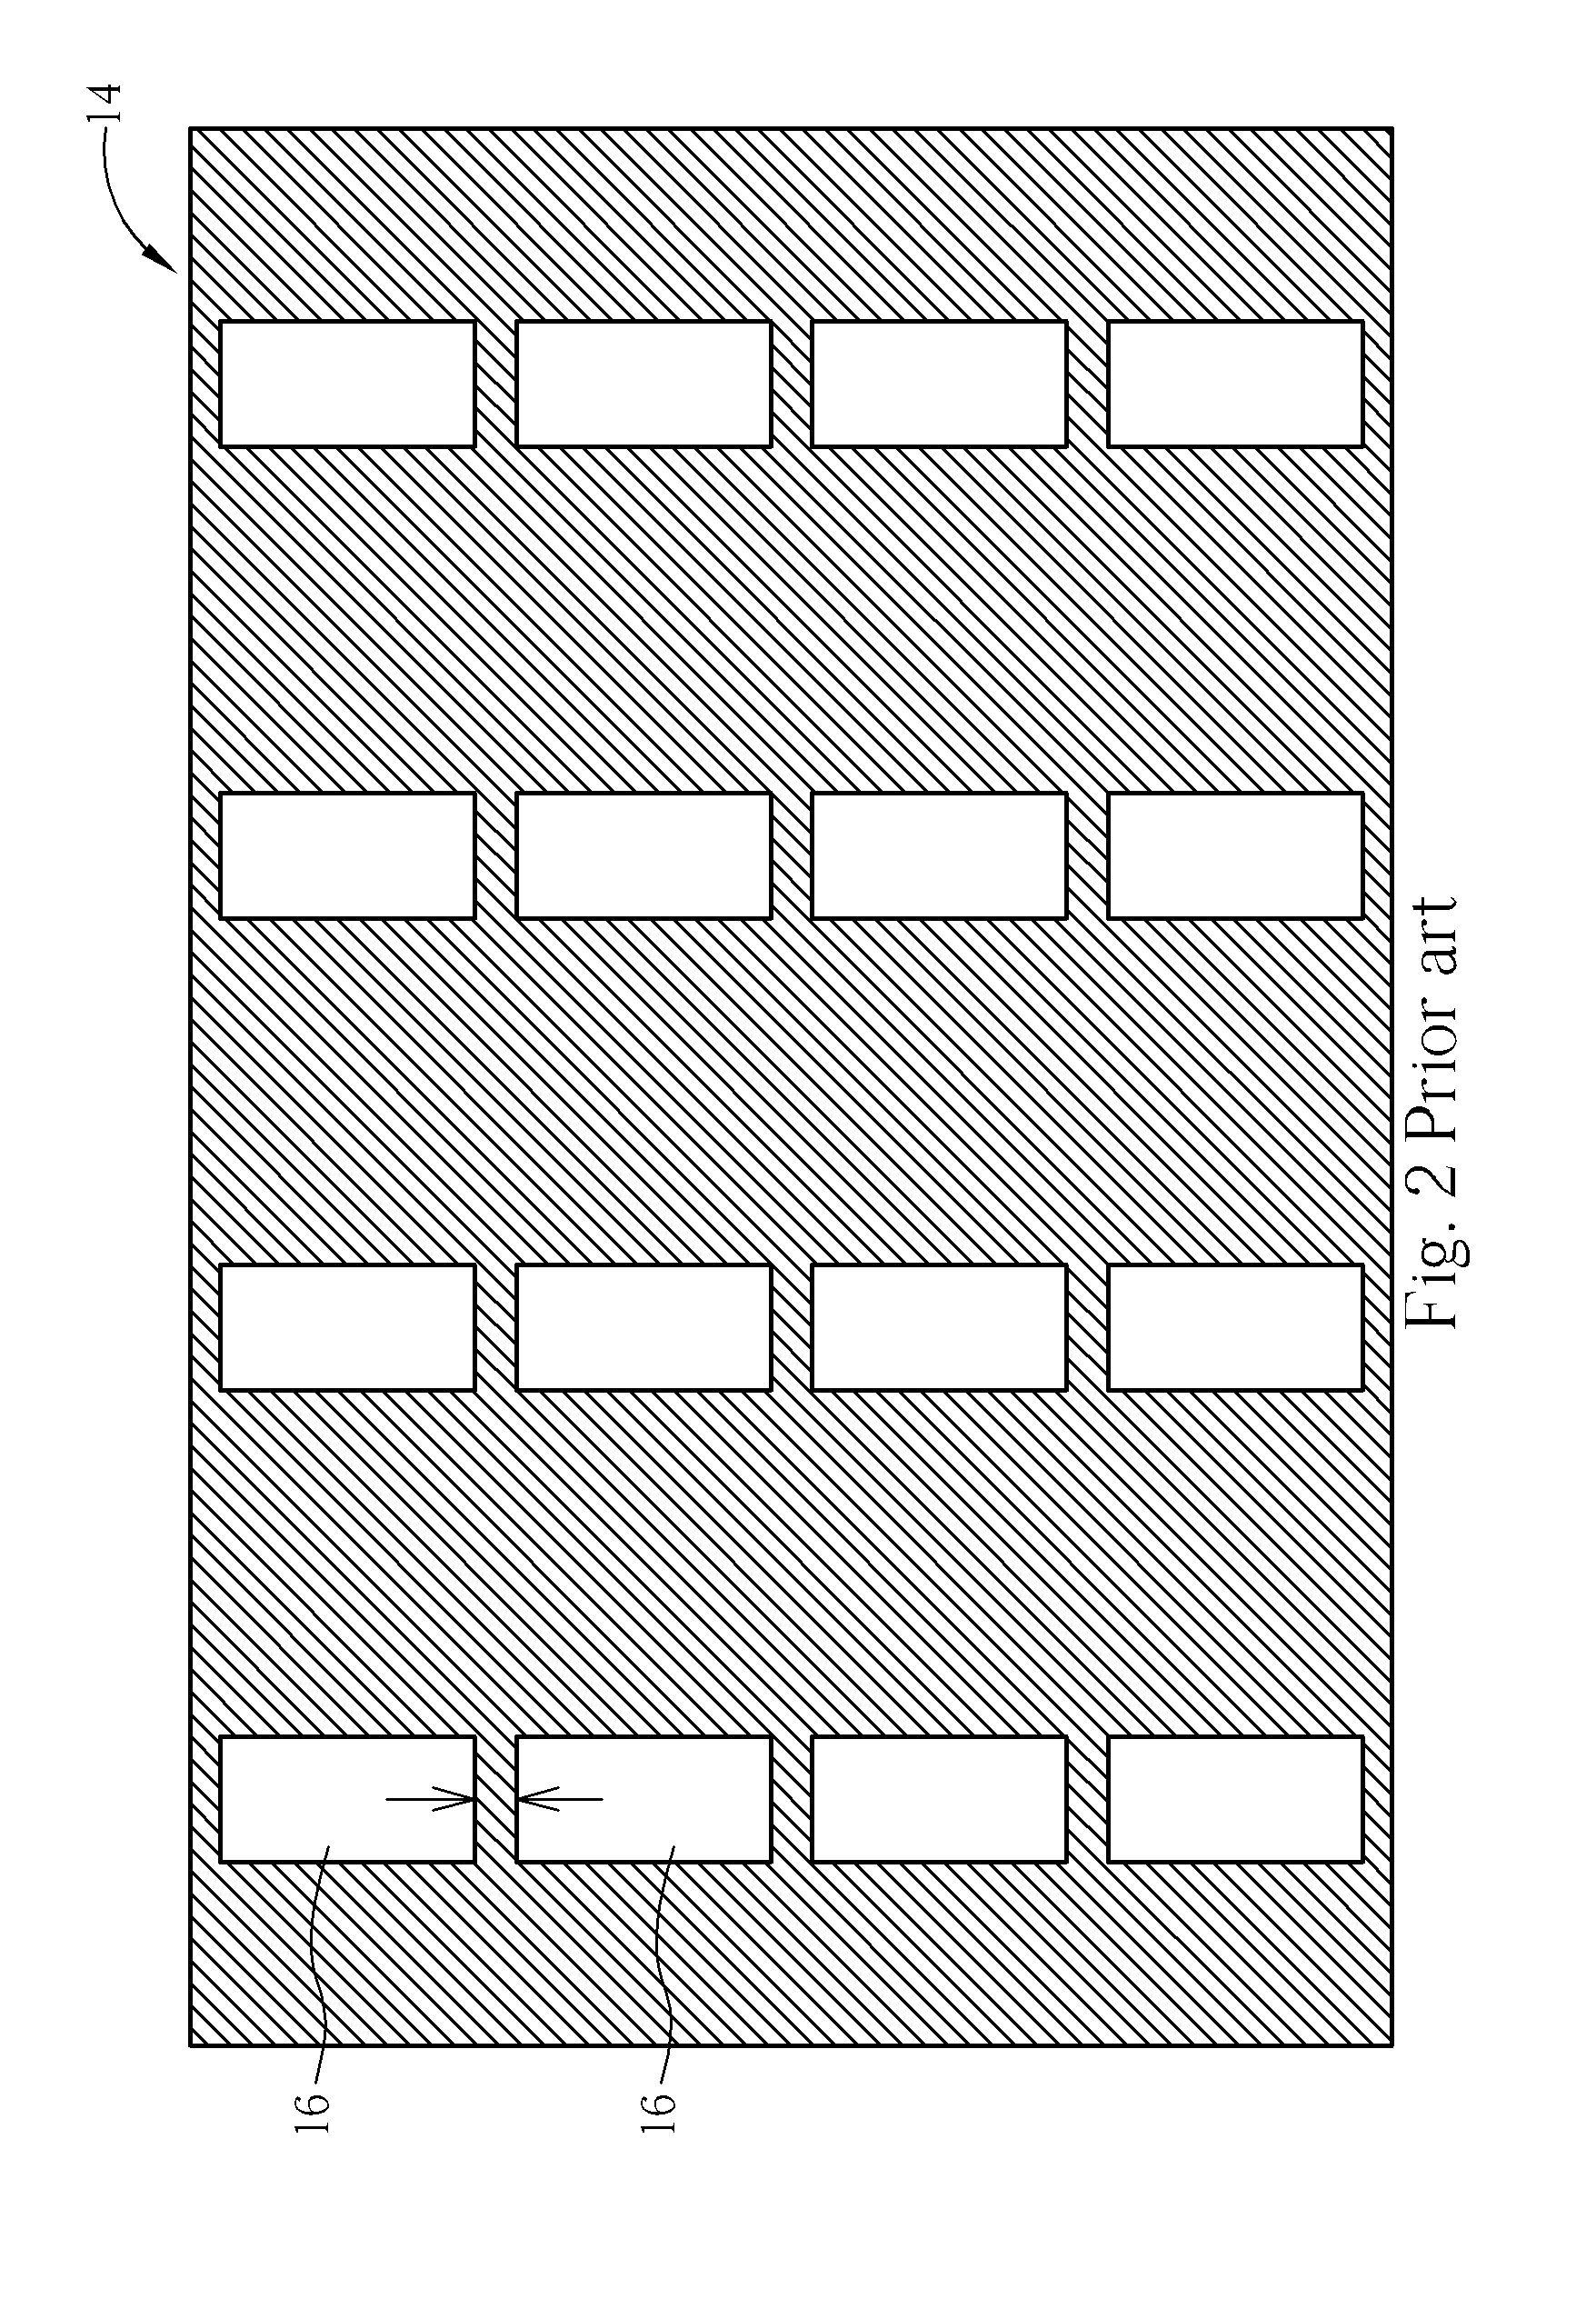 Pixel structure for electroluminescent panel and method of fabricating same